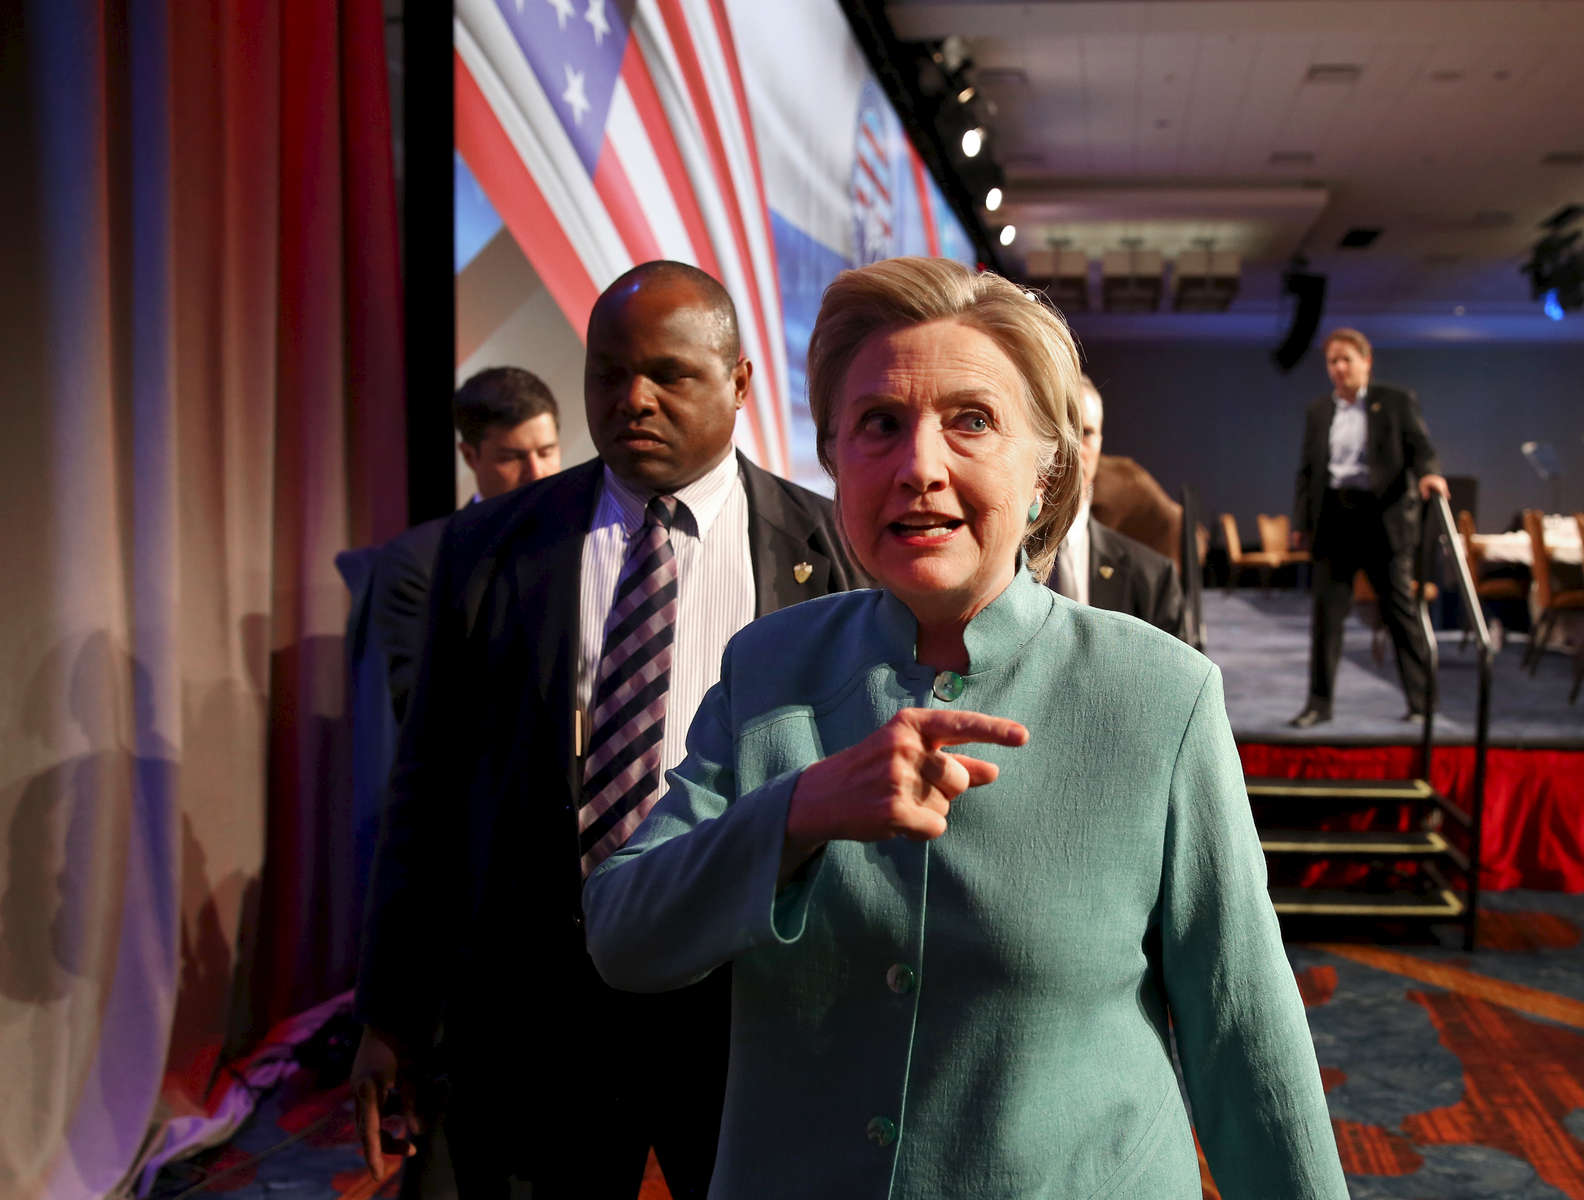 Democratic U.S. presidential candidate Hillary Clinton exits after speaking at the U.S. Conference of Mayors 84th Annual Meeting in Indianapolis, Indiana United States, June 26, 2016.    REUTERS/Chris Bergin